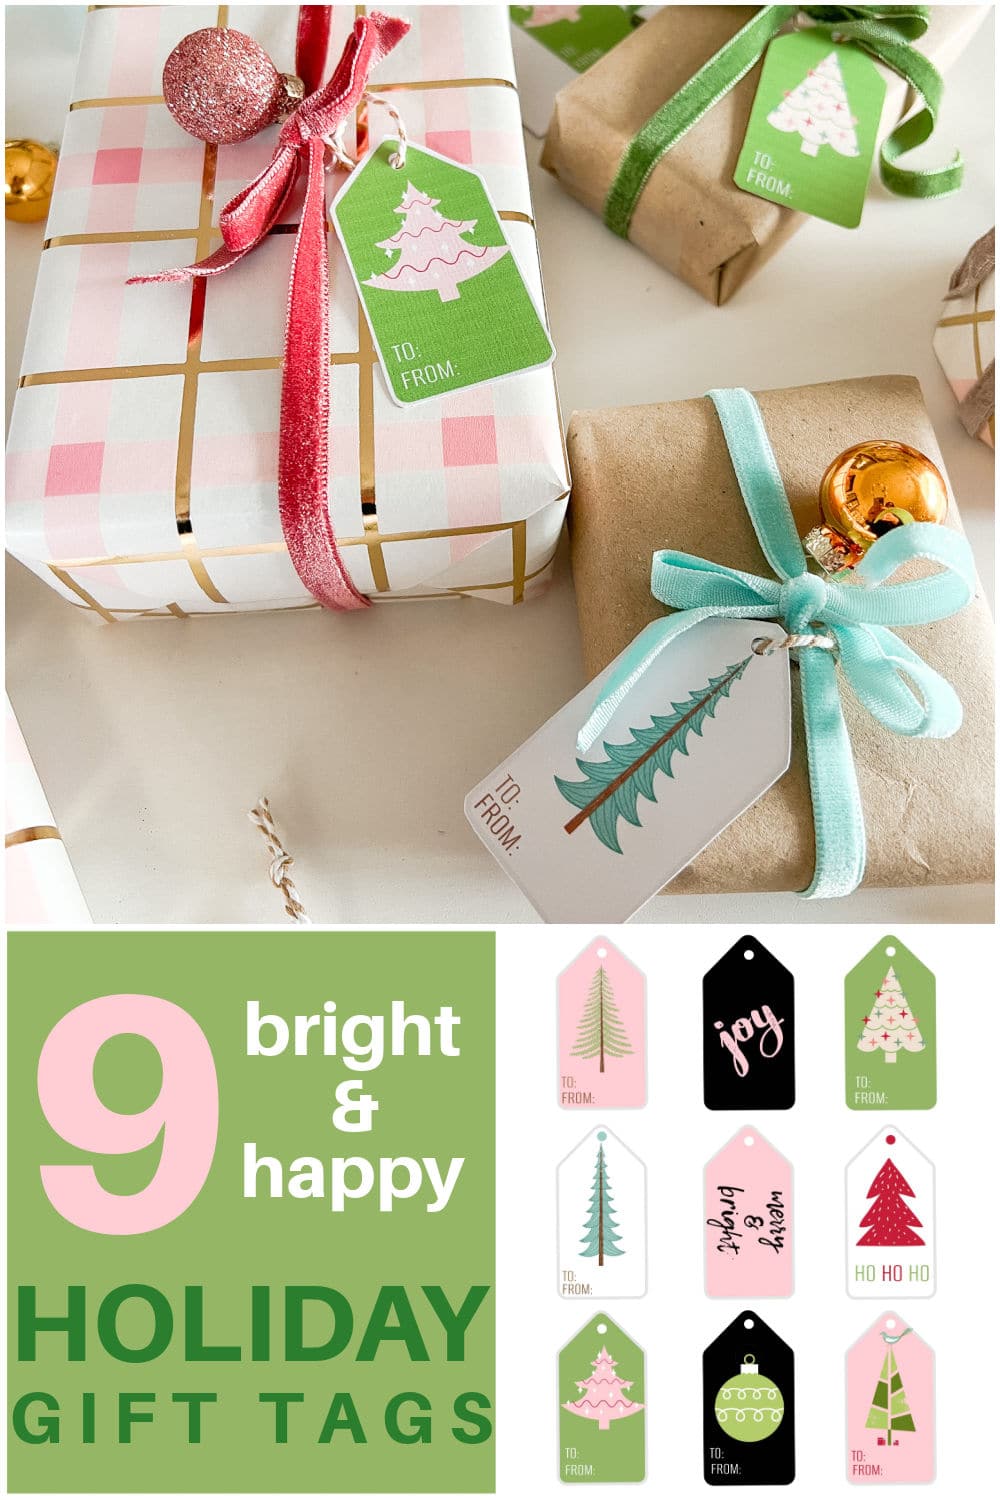 9 Bright Printable Holiday Gift Tags. Add some bright holiday tags to your gifts this year. These free bright and colorful printable tags are so easy to download, print off and add to your gifts this year! 